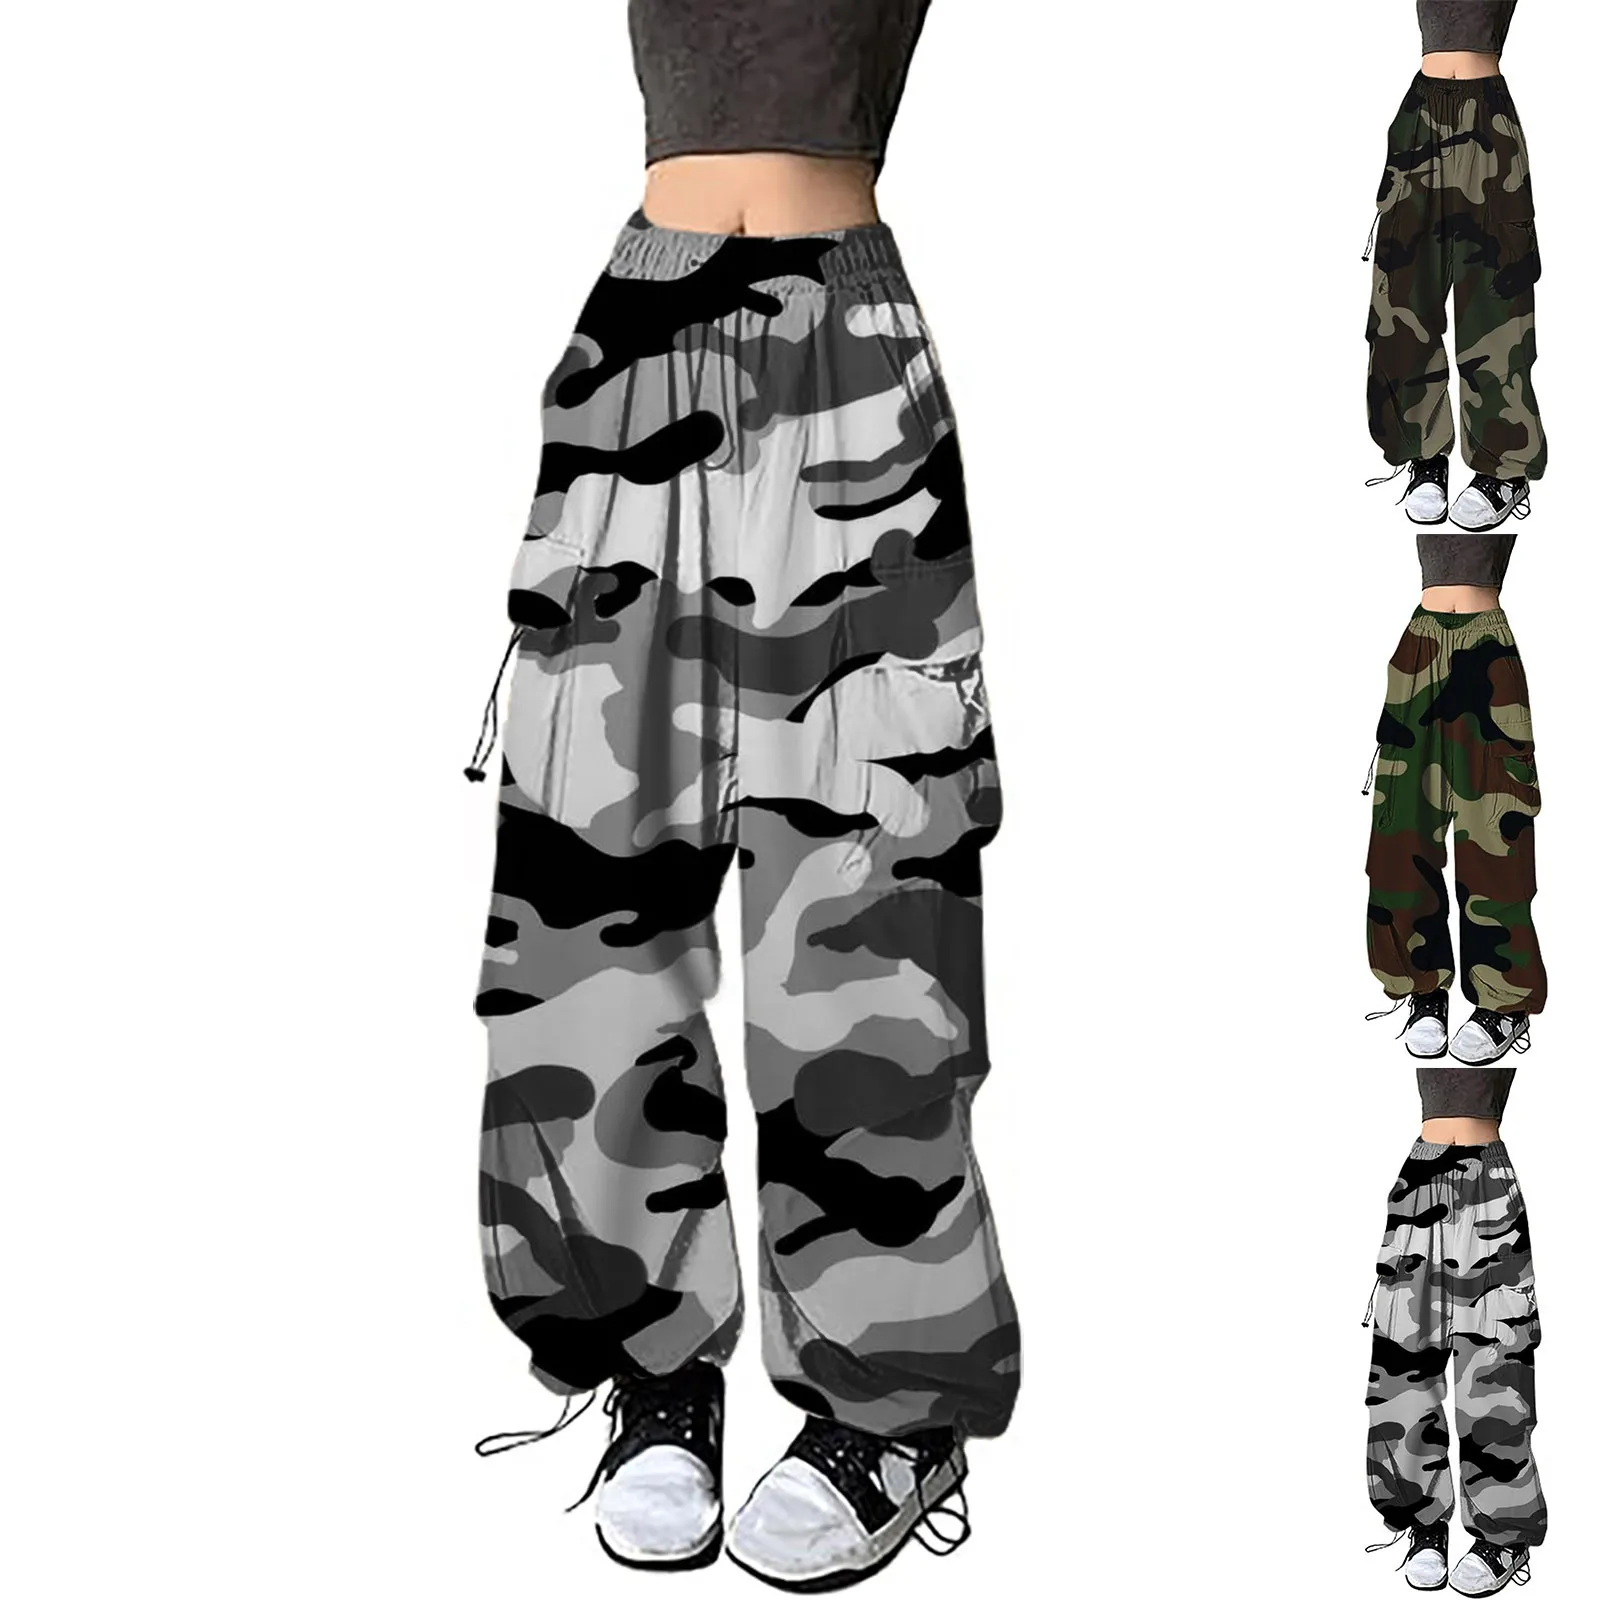 Stretchy Waist Womens Baggy Cargo Pants Y2K Streetwear Hip Hop Joggers Sweatpants Casual Loose Camouflage Wide Leg Trousers womens curvy ass jeans high waist butt lift denim pants stretchy stretch butt sharping ass jeans plain high waist skinny jeans